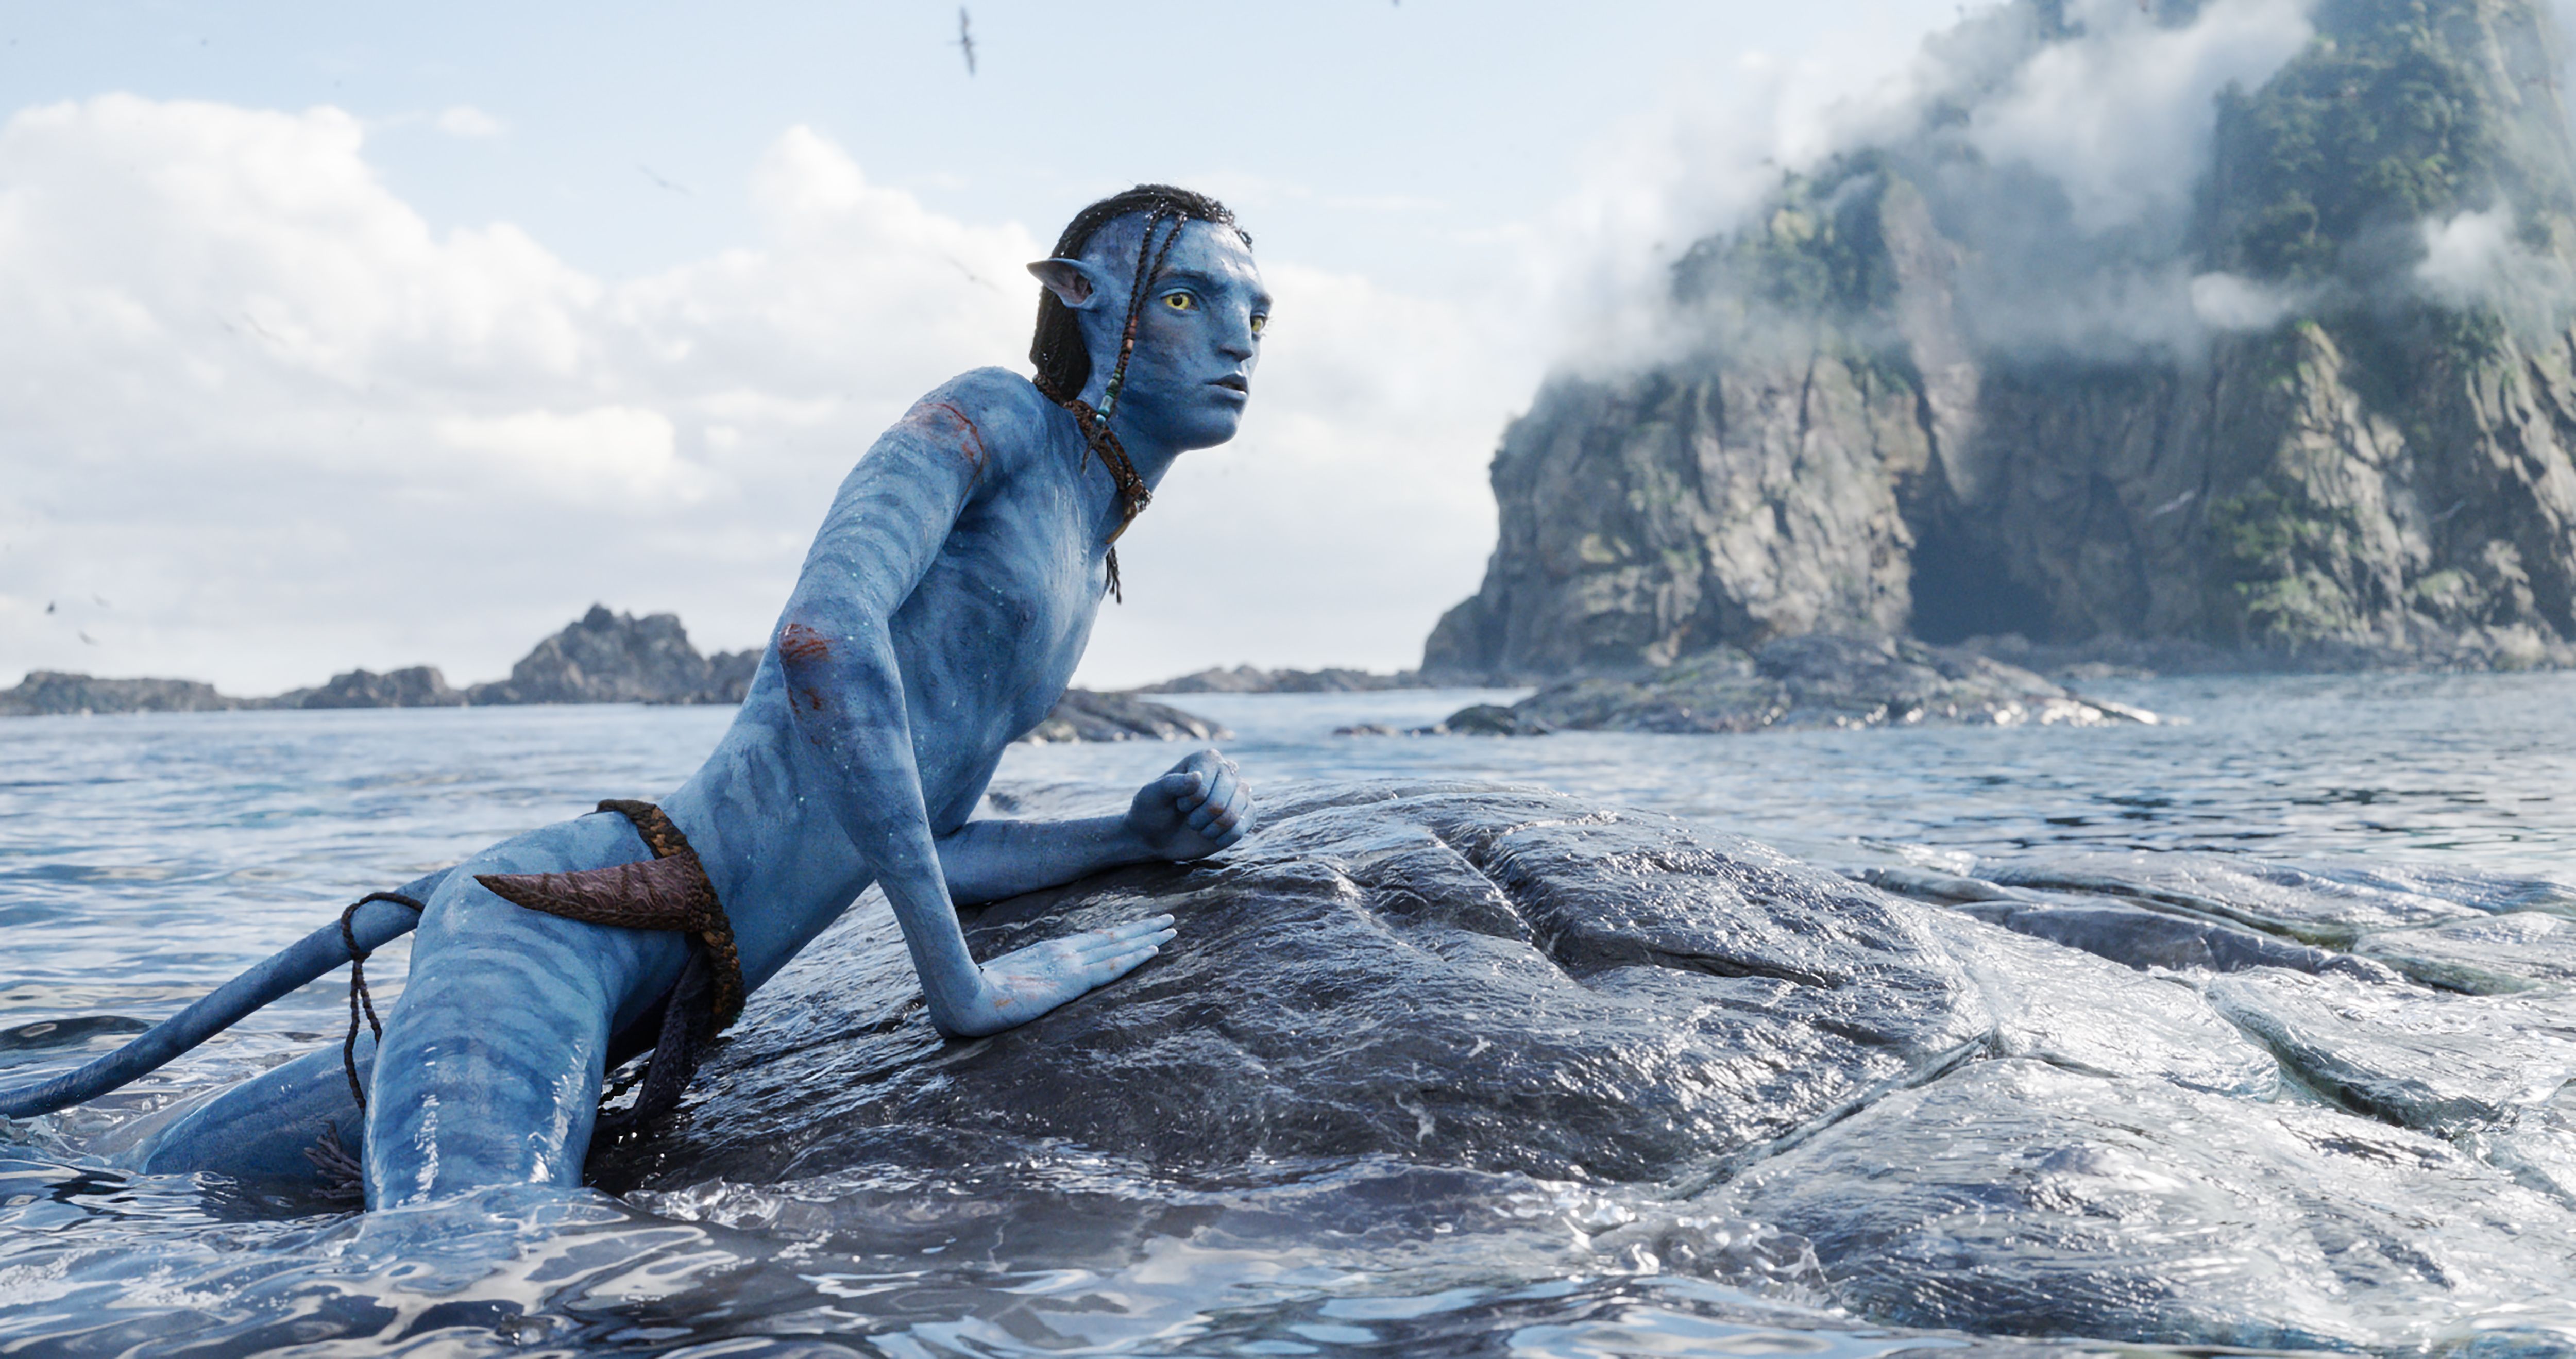 Avatar The Way of Water Disney Plus Streaming Release Date Announced   HIGH ON CINEMA